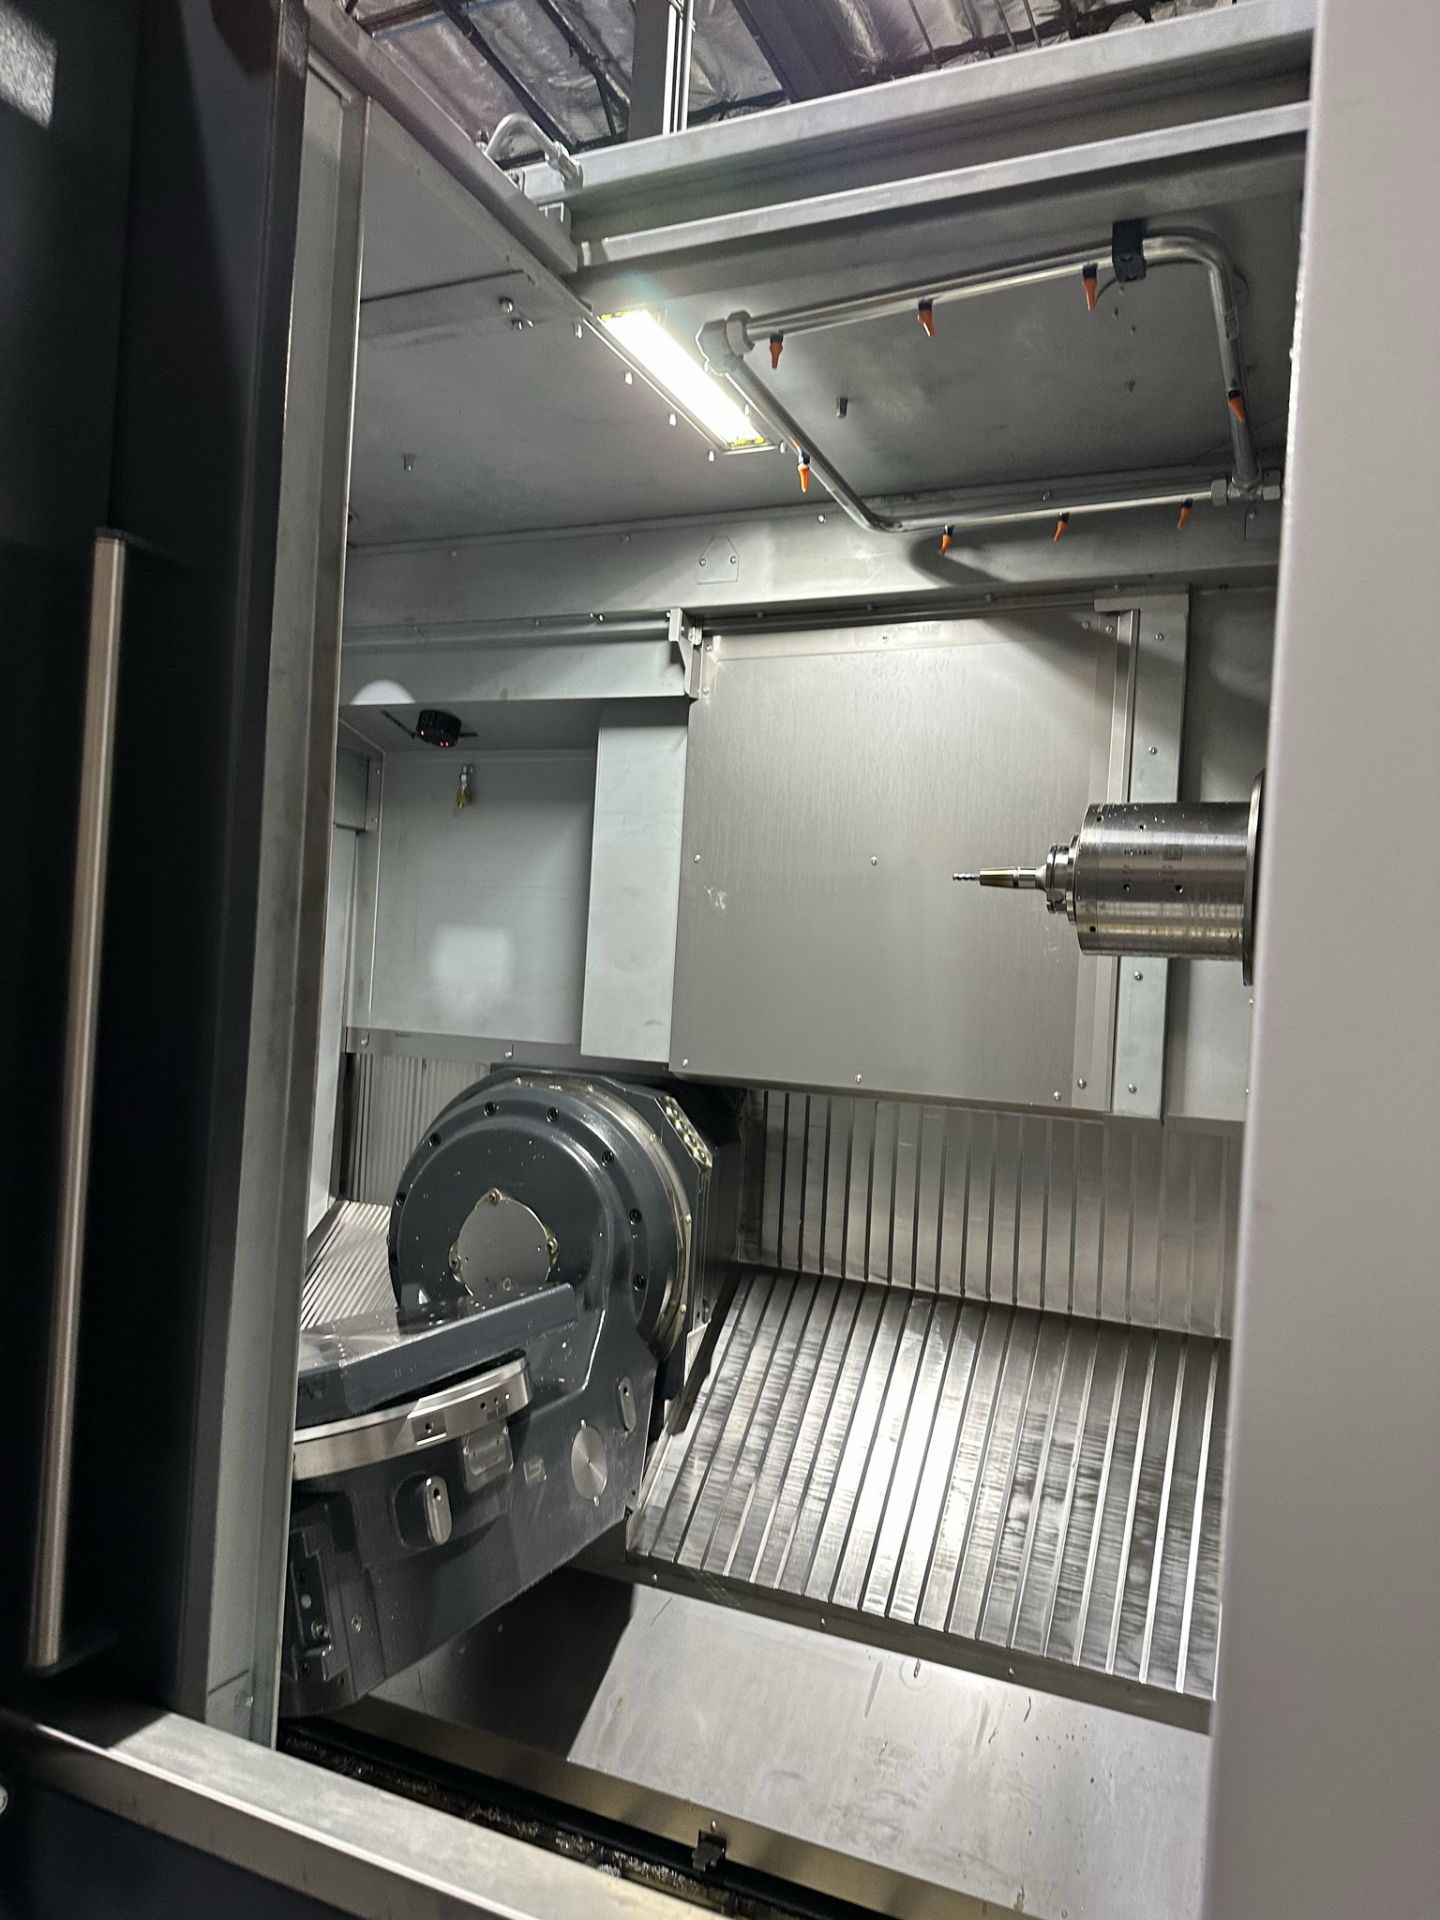 2022 Heller HF-5500 HSK-A100 5-Axis Horizontal Machining Center ***Like Brand New*** - Image 22 of 83